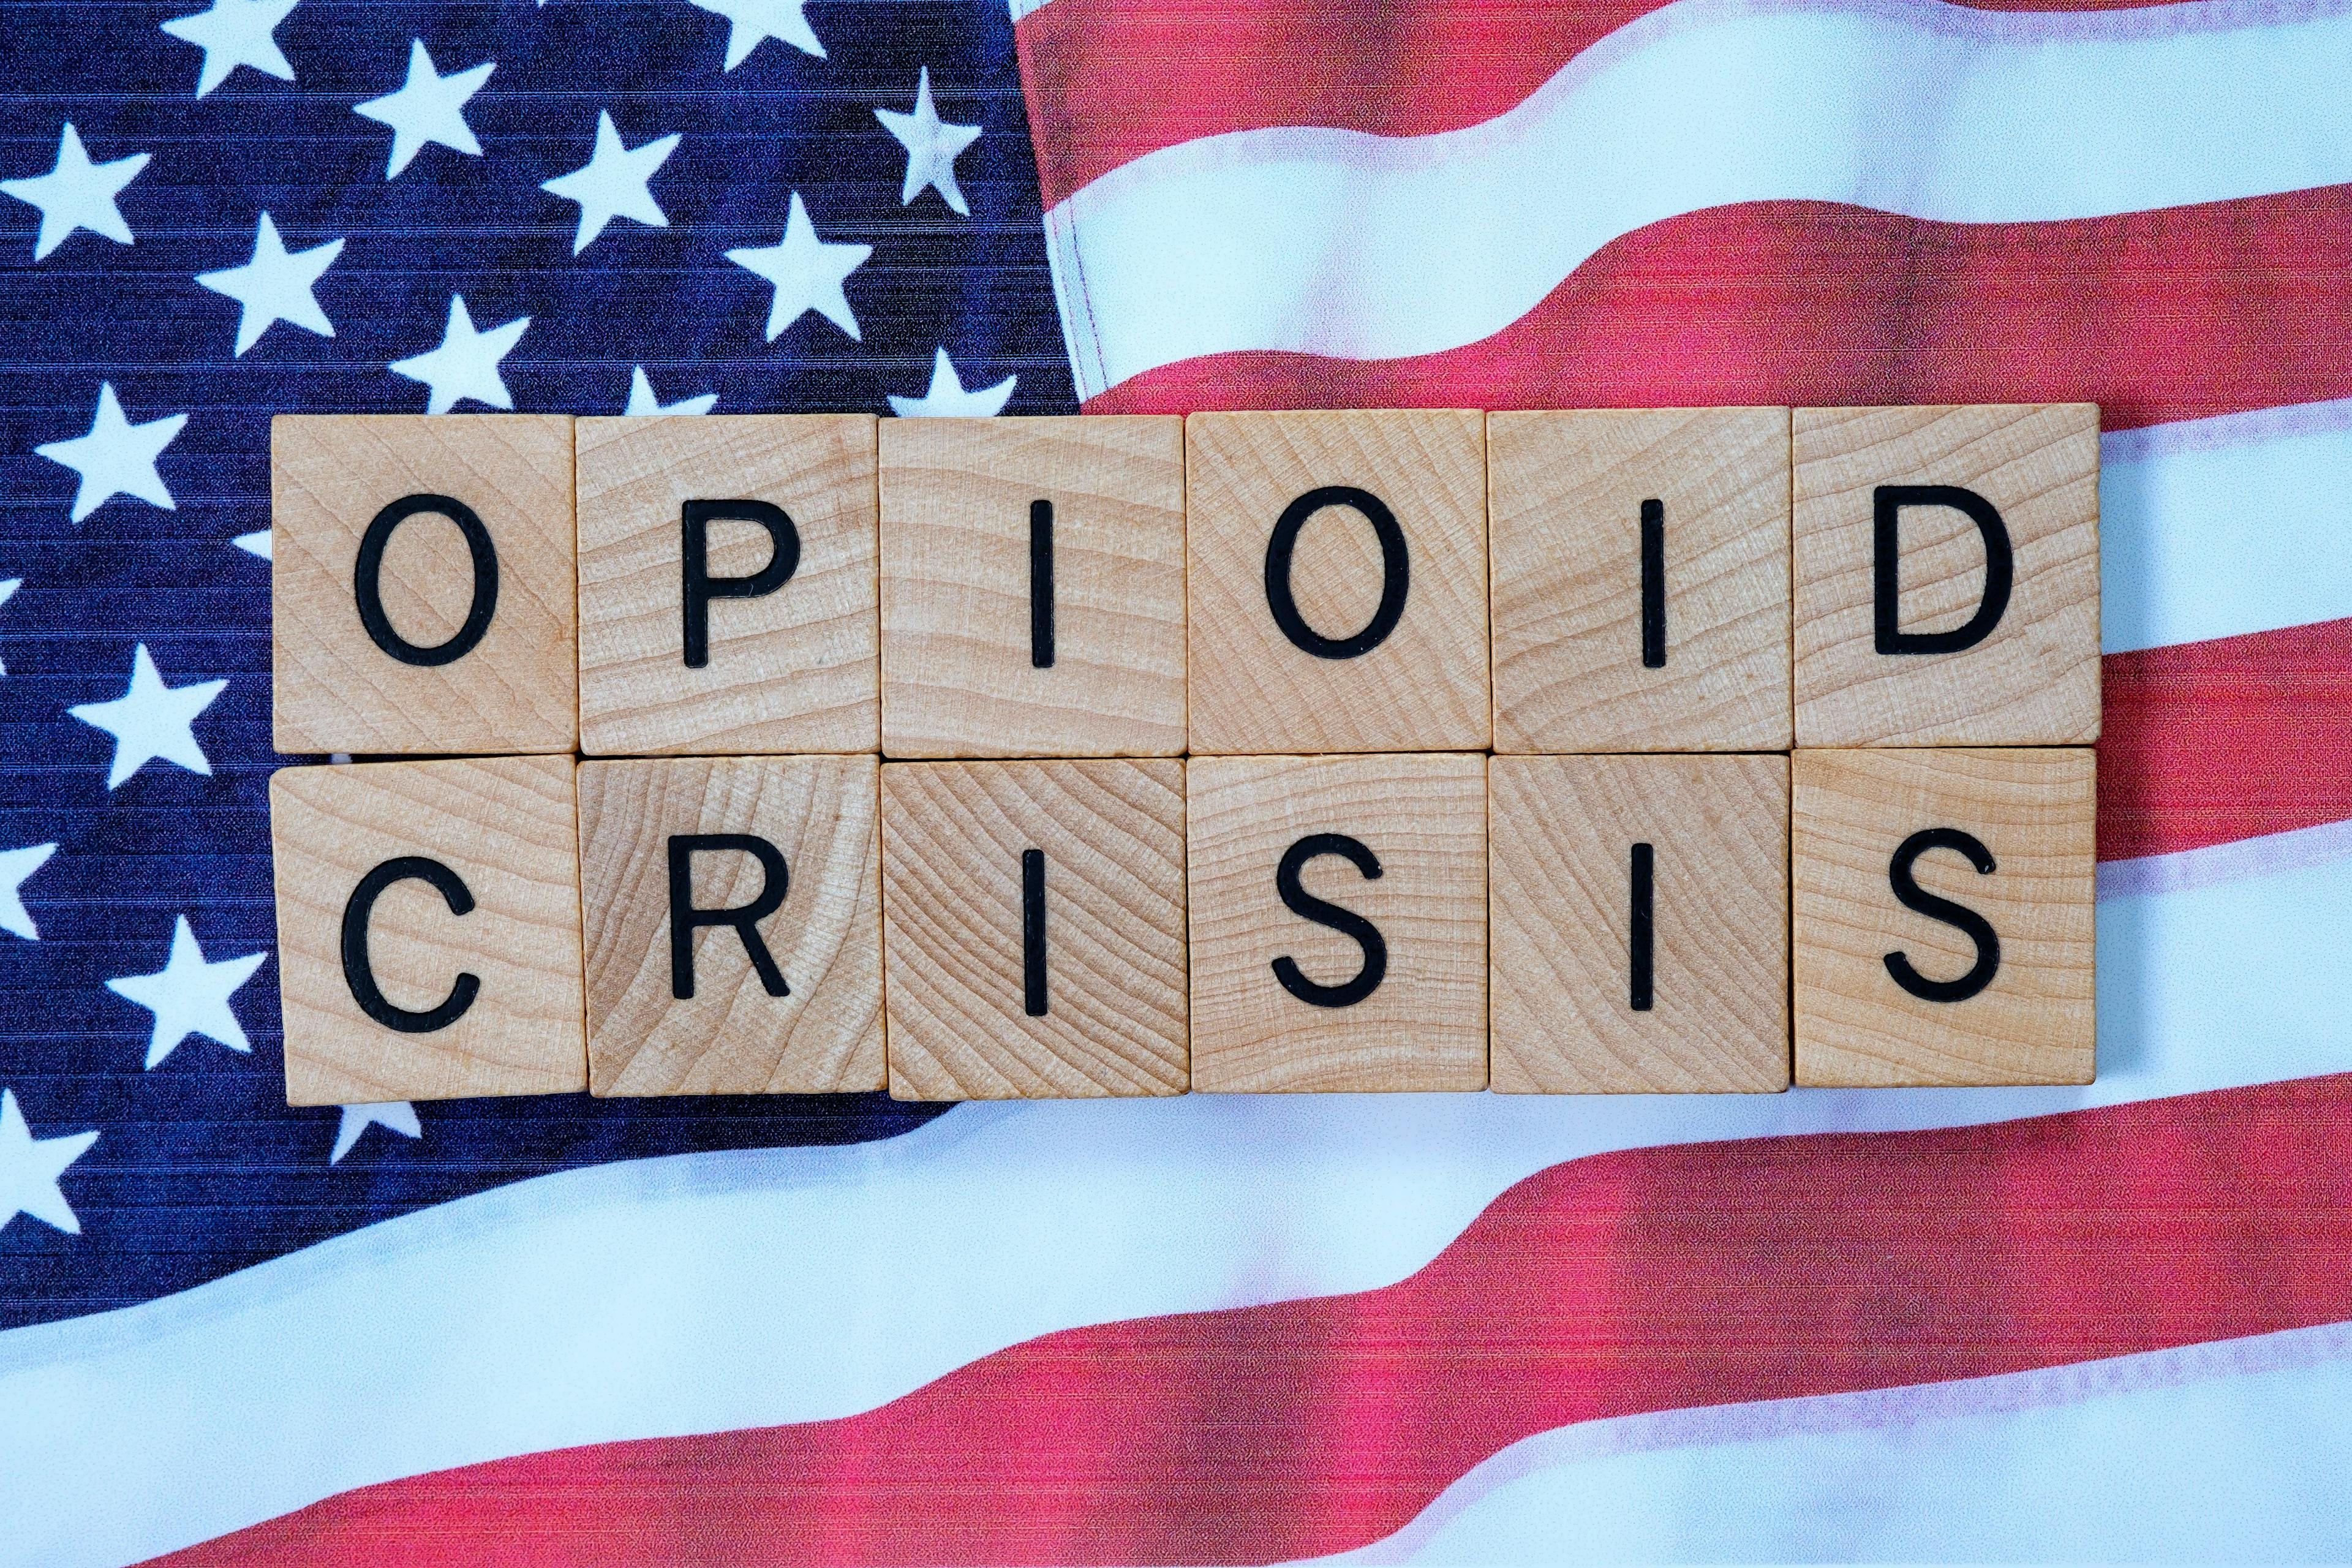 Opioid crisis fallout: Physicians increasingly avoid treating chronic pain patients, survey finds